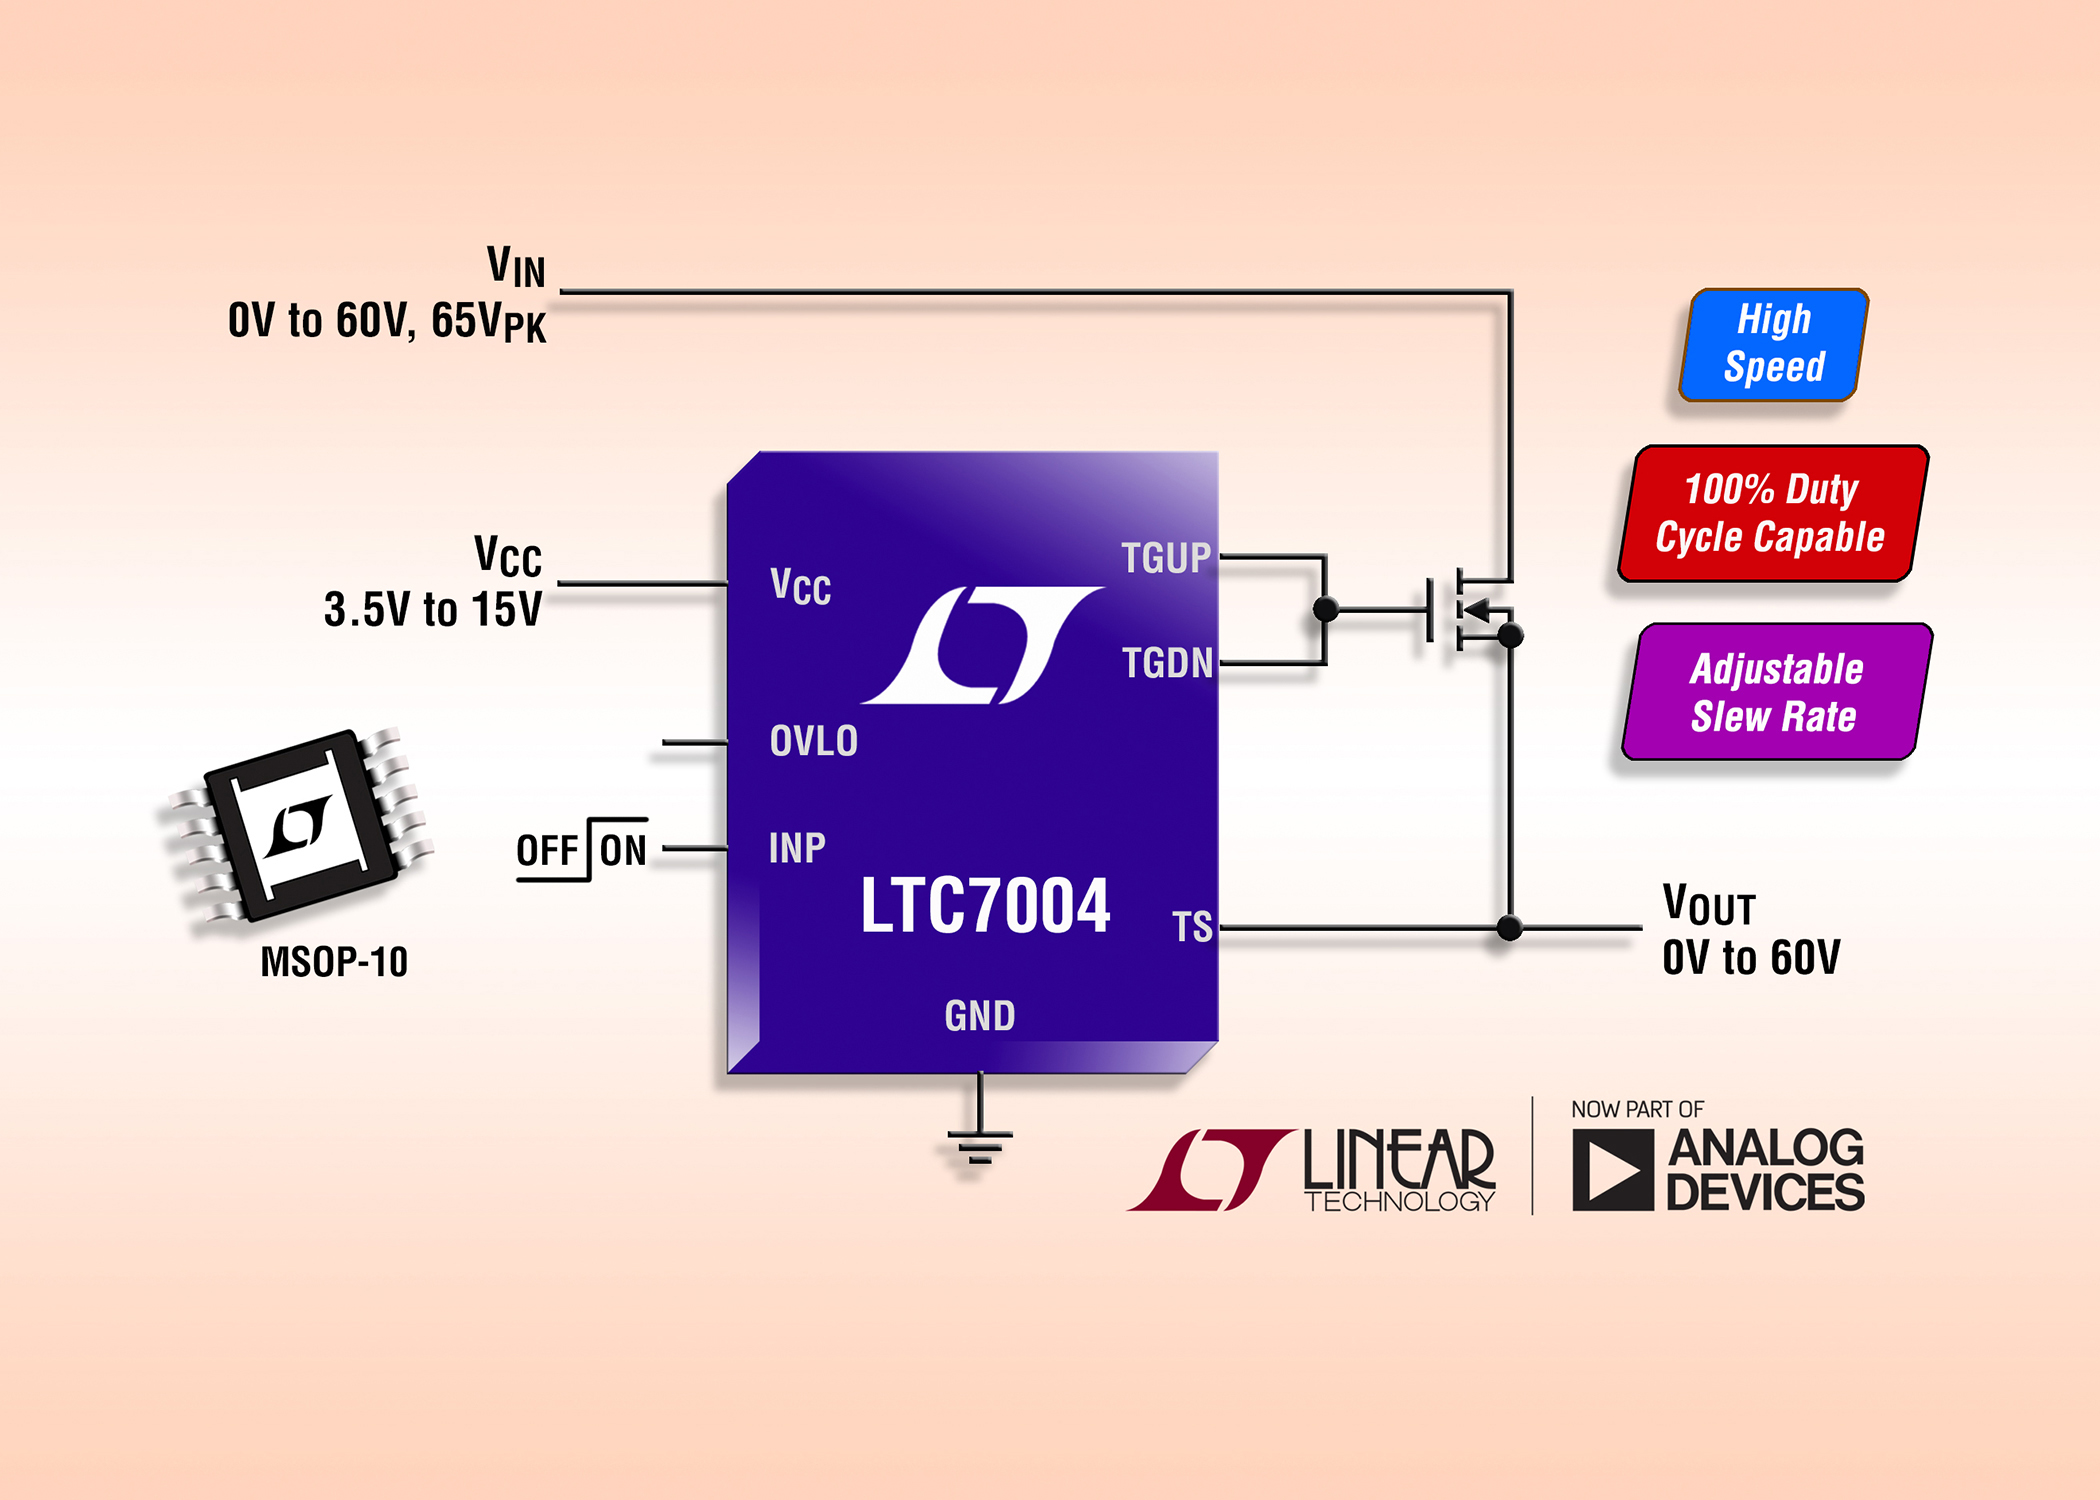 N-Channel MOSFET driver provides 100% duty cycle capability